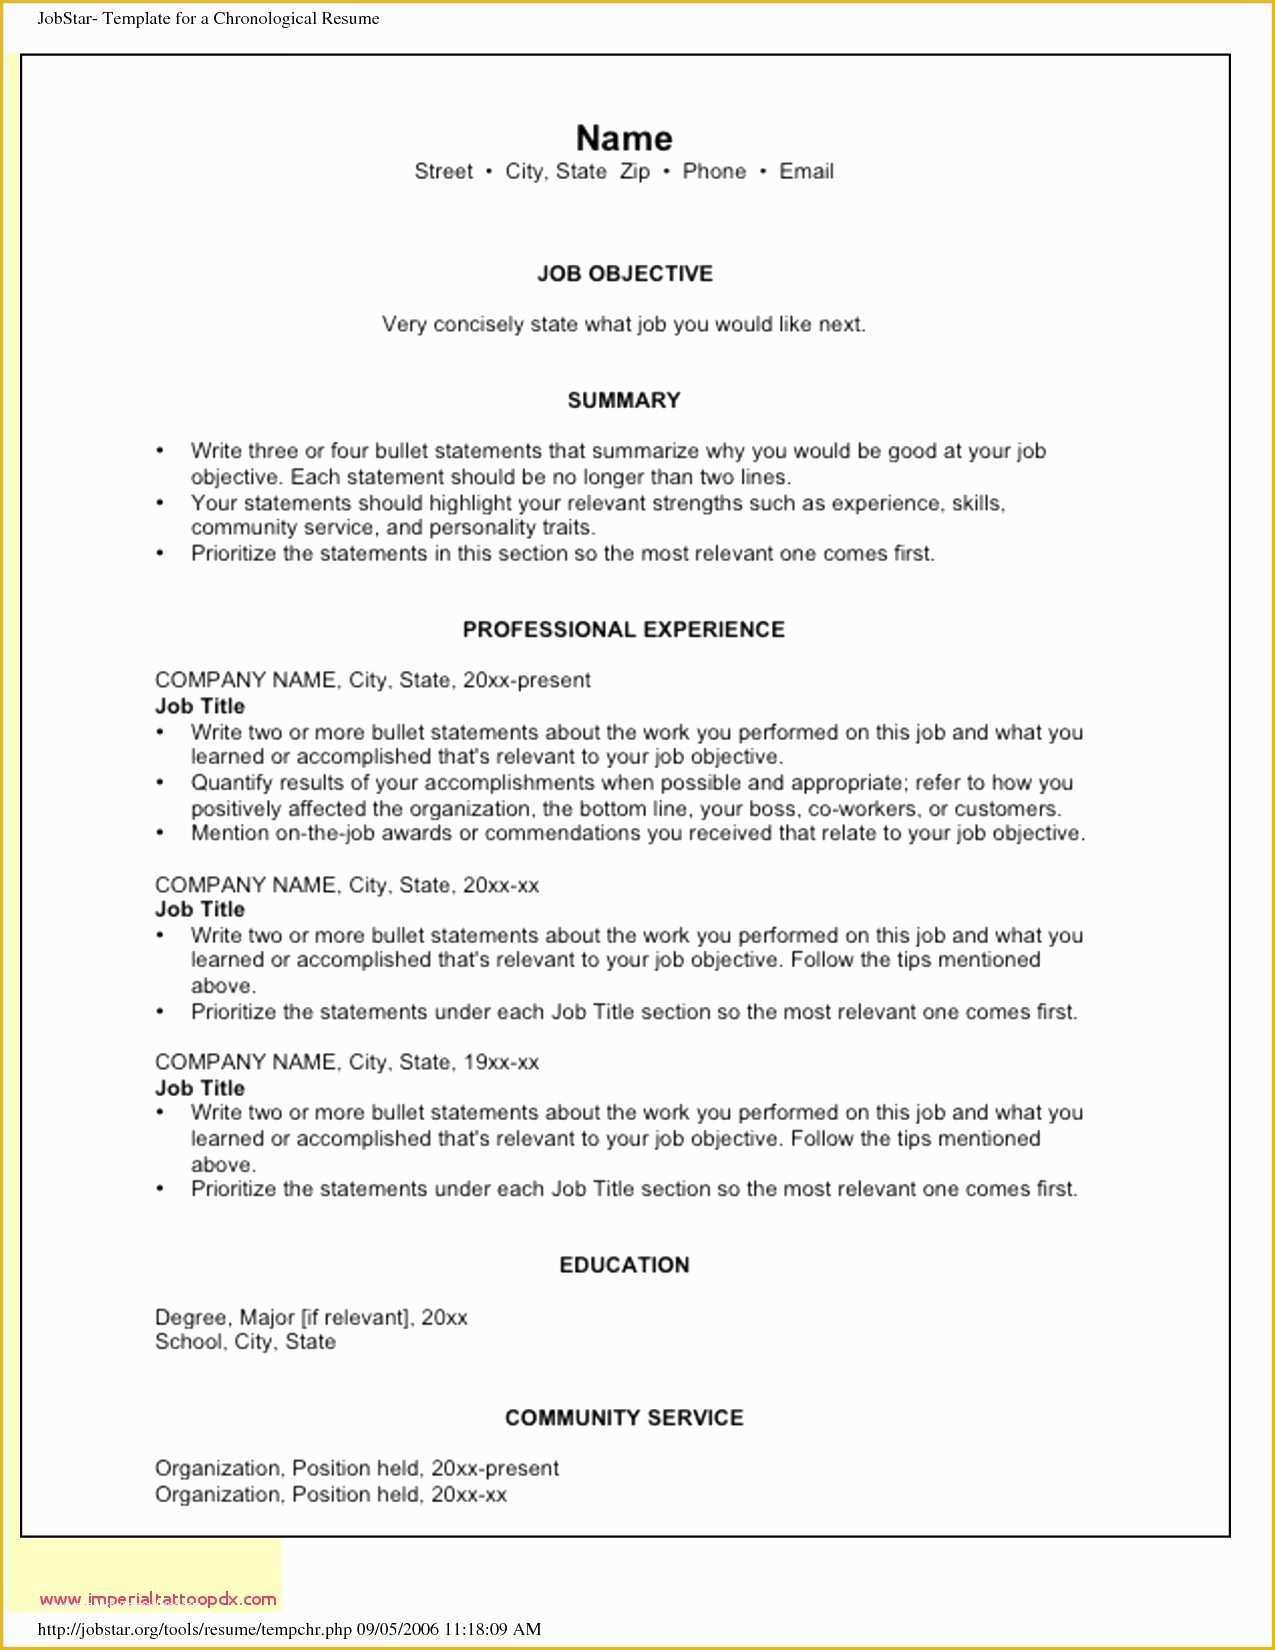 Free Resume Templates for Stay at Home Moms Of Stay at Home Mom Resume Template Gta6gamer